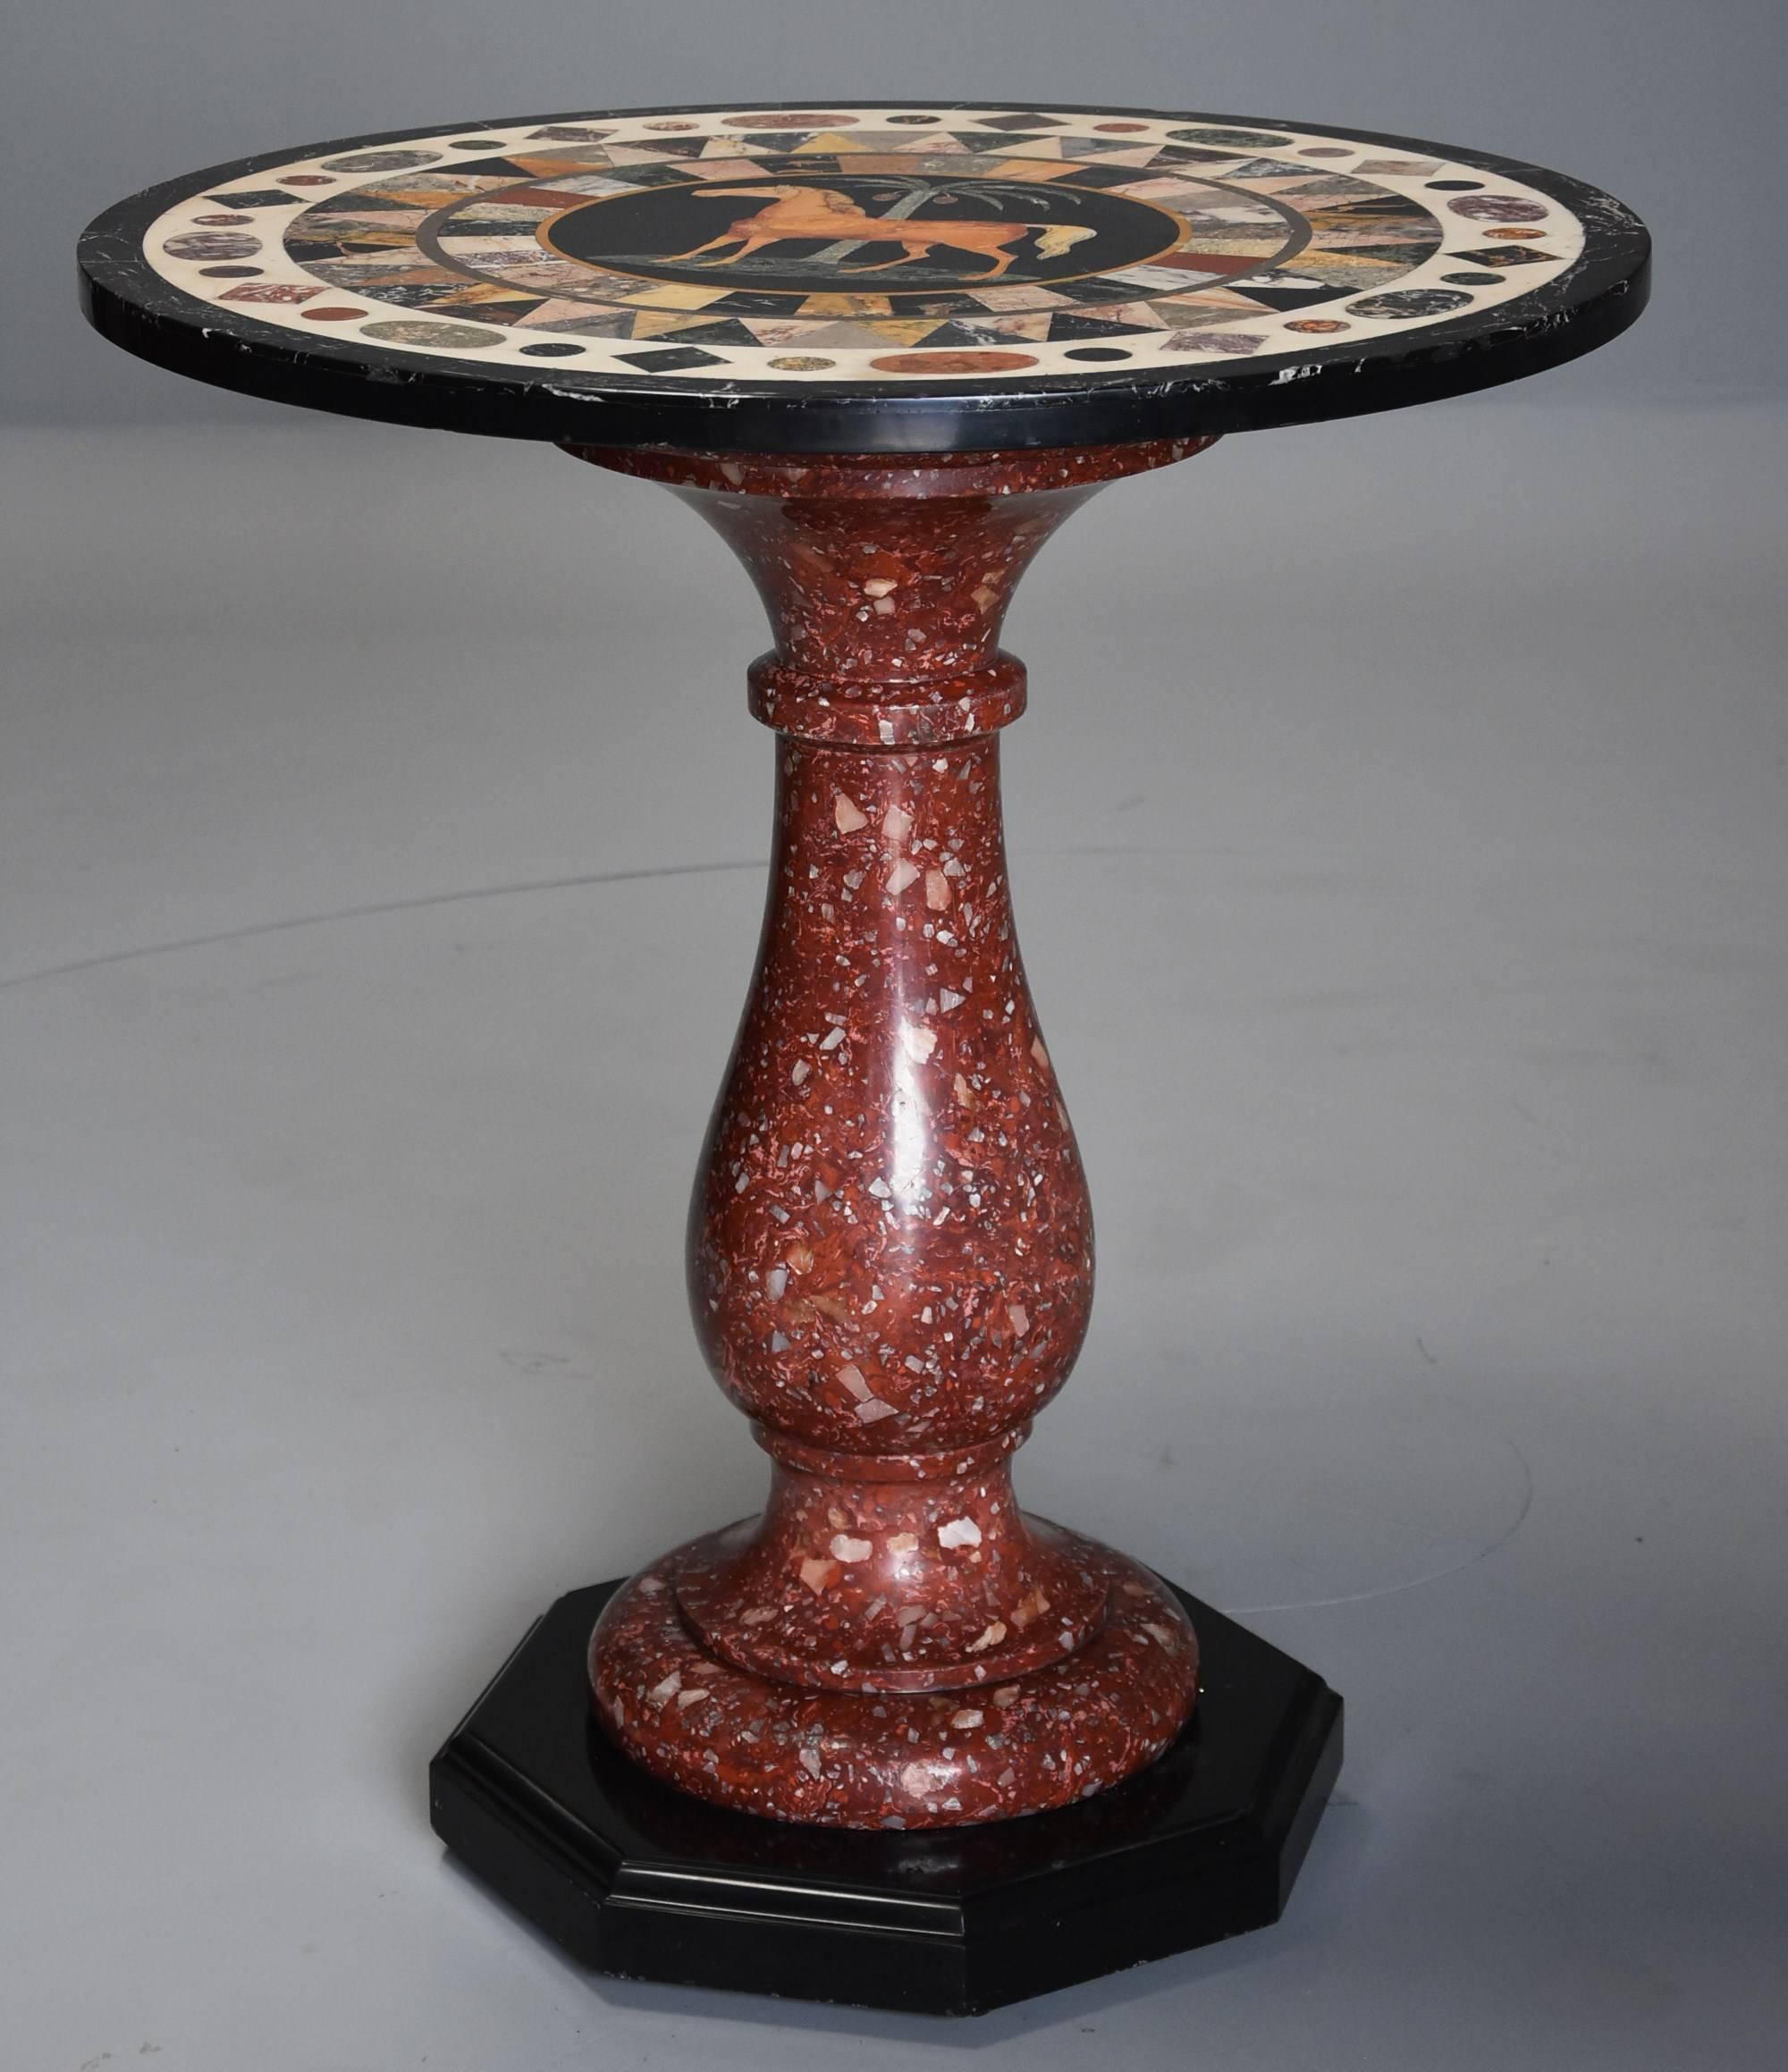 A superb quality mid-19th century Maltese pietra dura marble centre table attributed to Joseph Darmanin & Sons.

The tabletop is intricately inlaid with a central scene depicting a horse infront of a palm tree.

This central section is